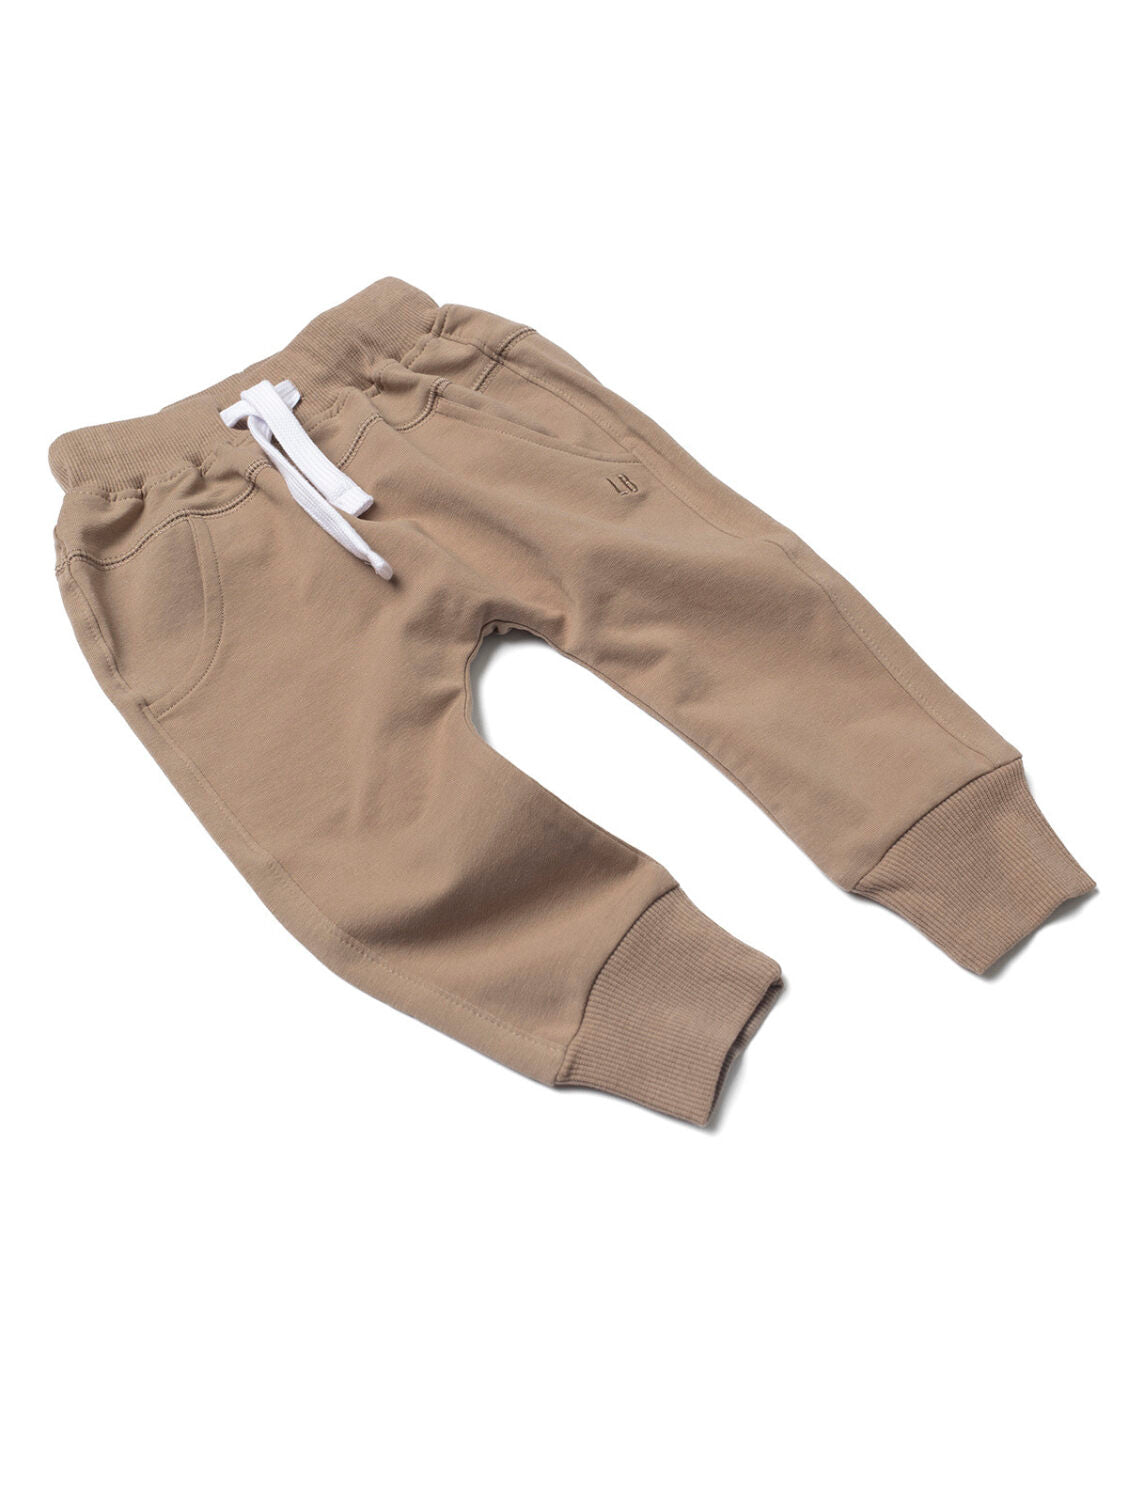 Jogger - Taupe